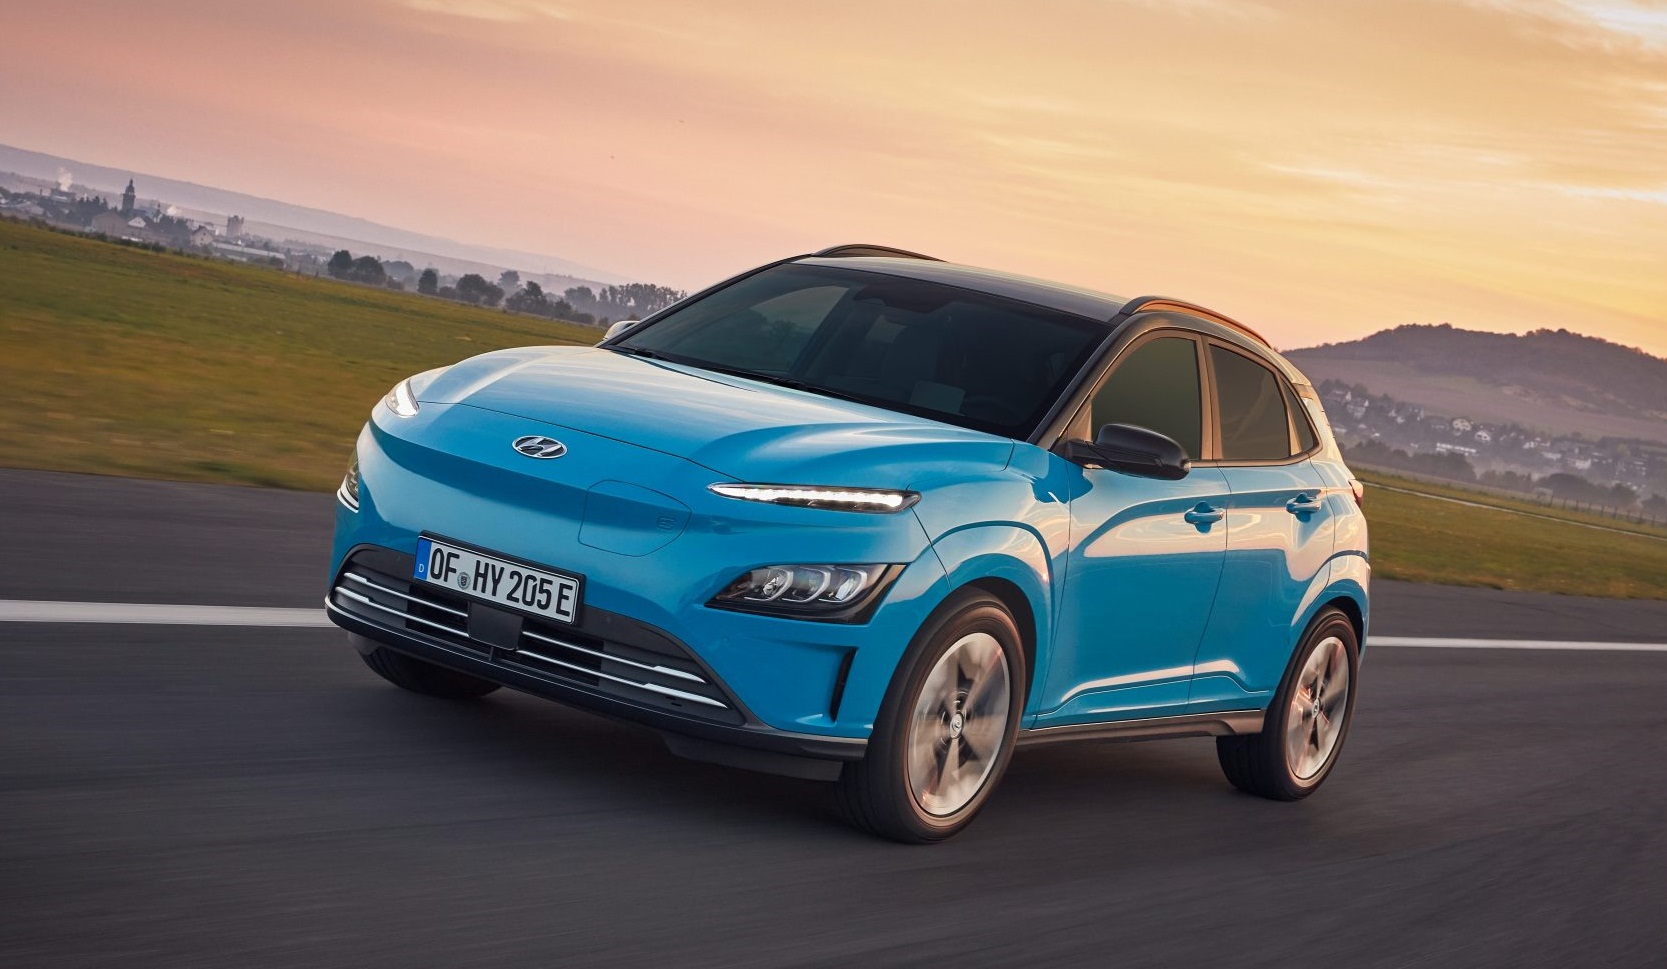 Hyundai Electric Cars: Types, Specifications and Prices